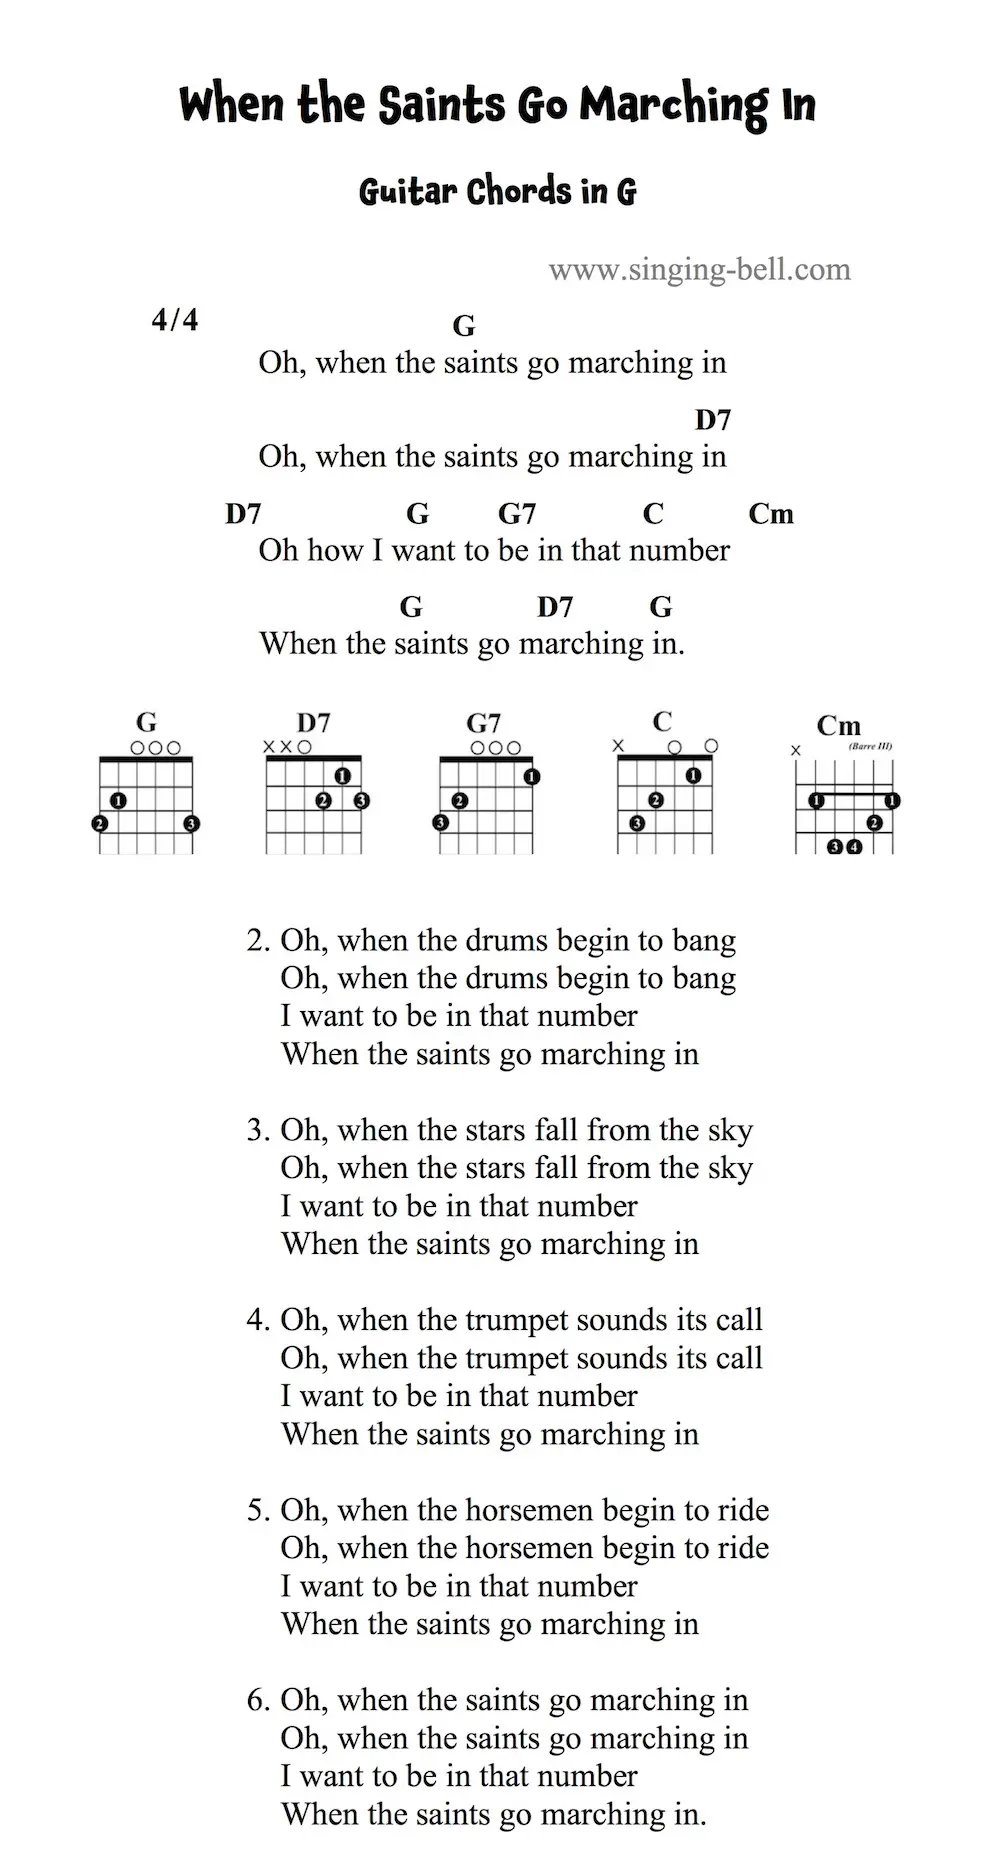 When the Saints Go Marching In - Guitar Chords and Tabs in G.